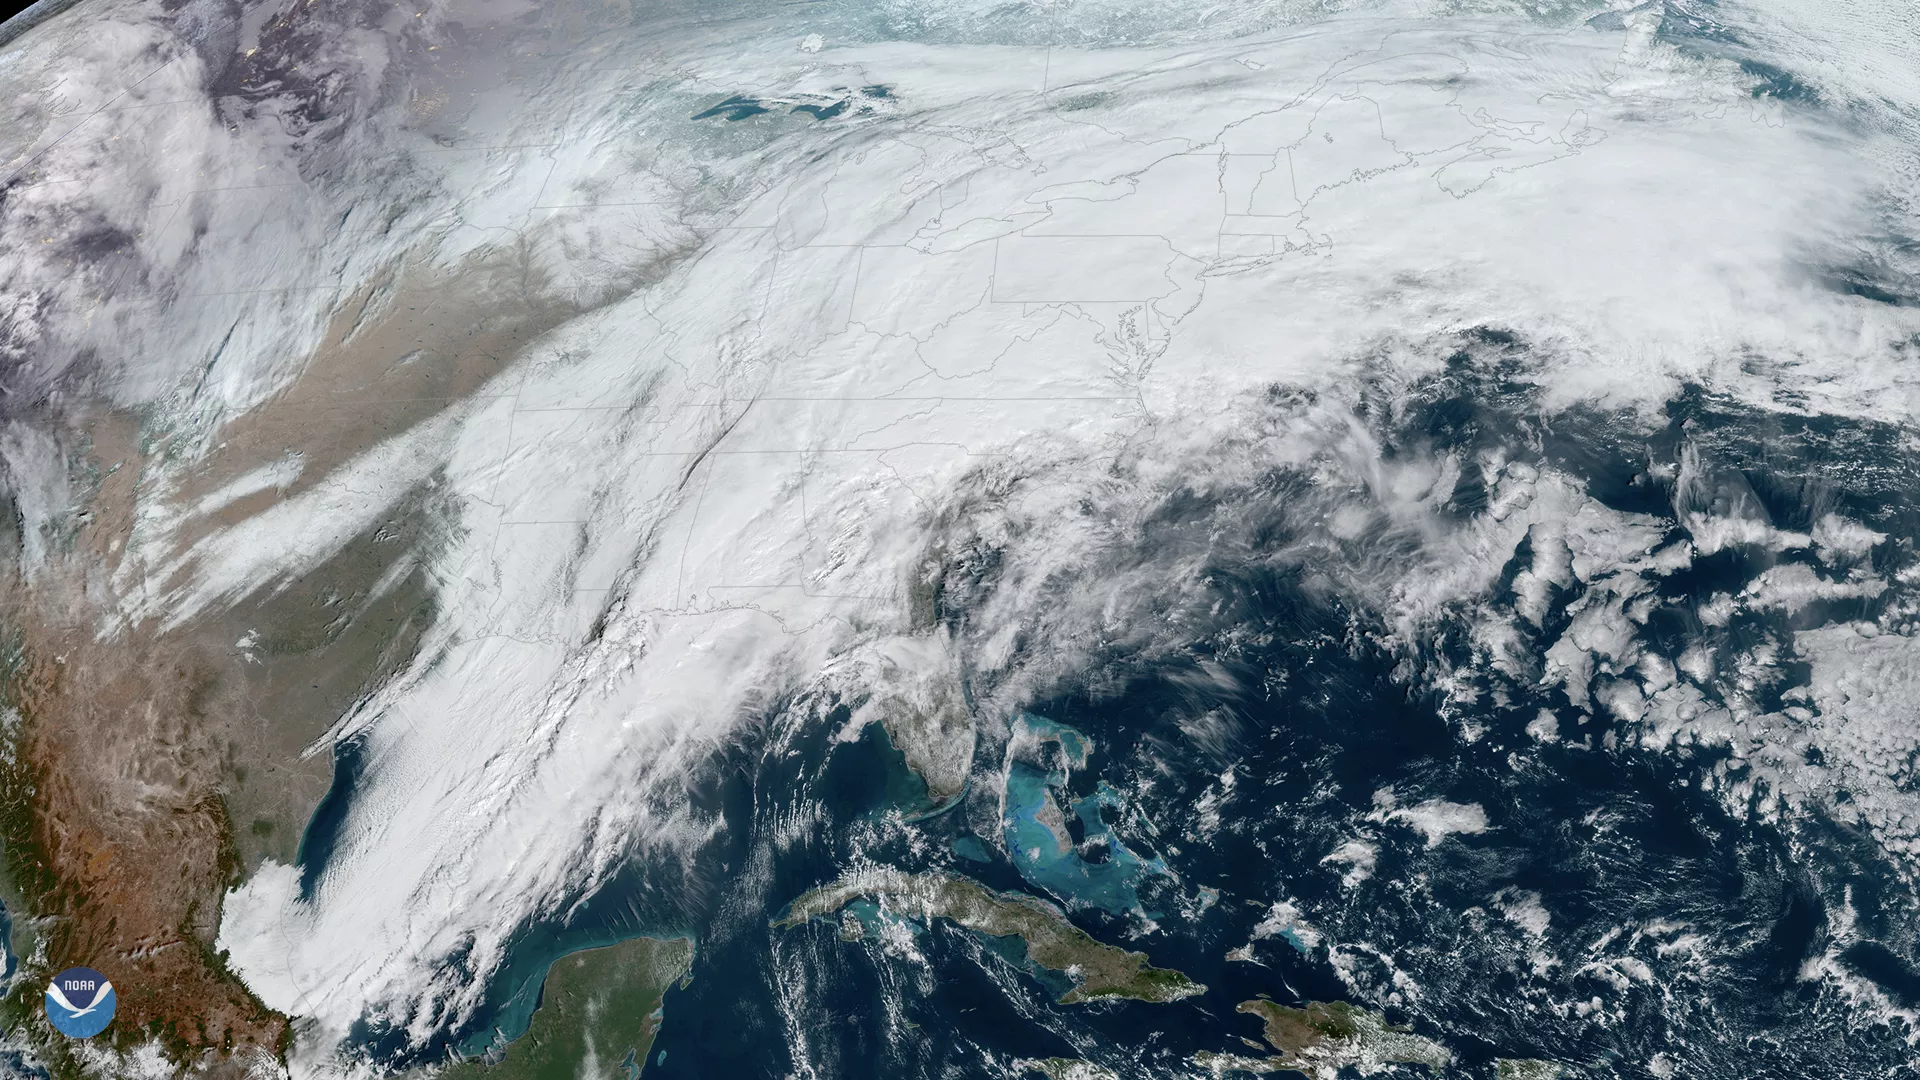 The GOES East satellite, via GeoColor, is watching a large winter storm stretching roughly 2,000 miles across the U.S., on Feb. 6, 2020.